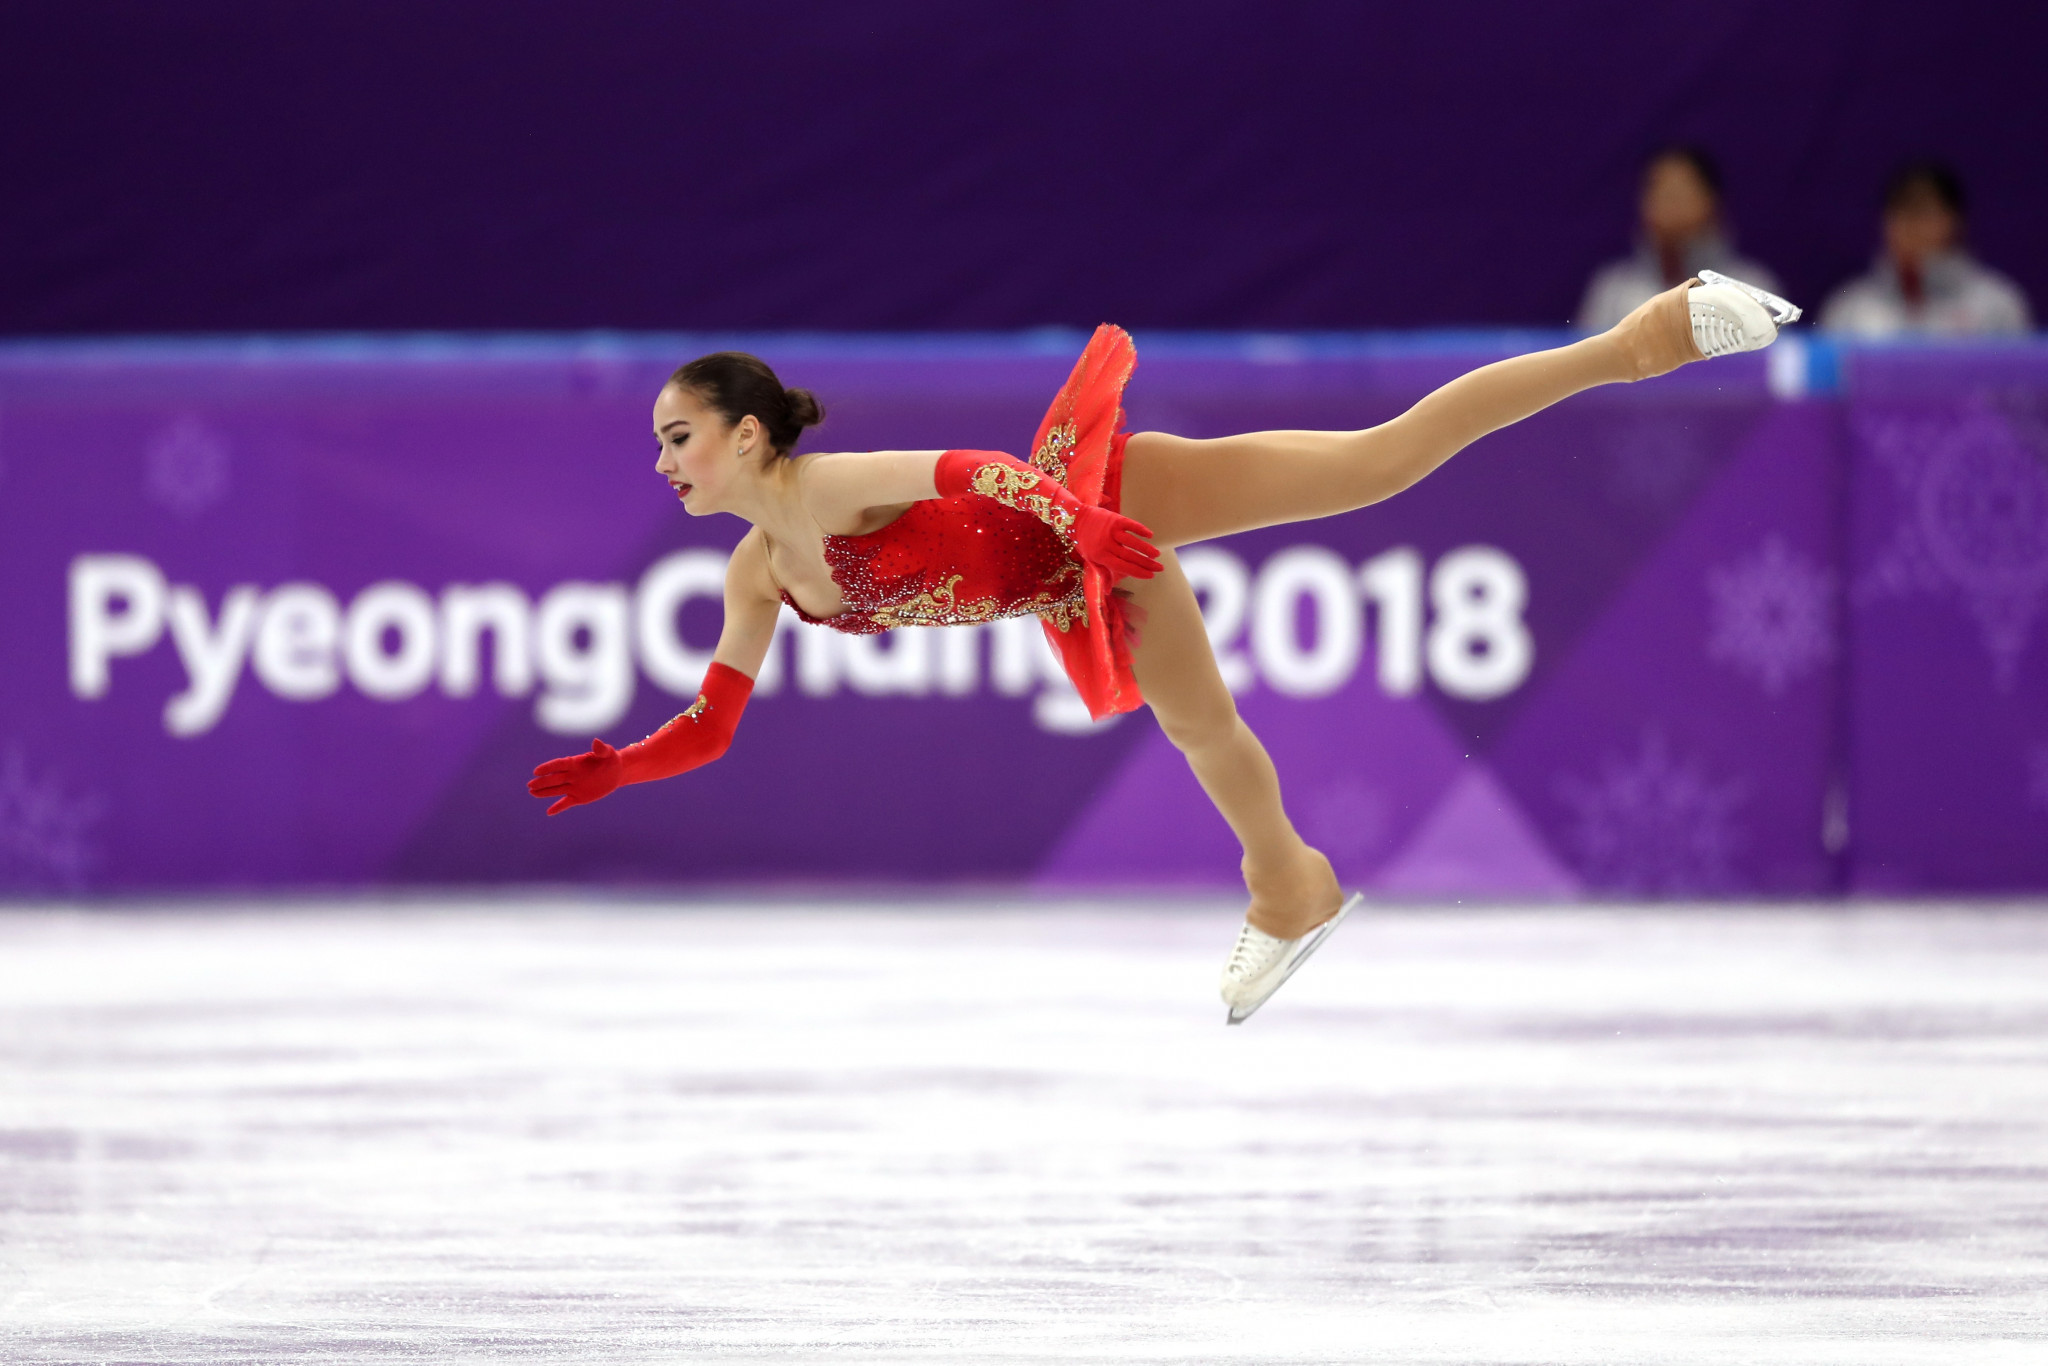 Teenage sensation Alina Zagitova claimed the OAR's first gold medal at Pyeongchang 2018 ©Getty Images